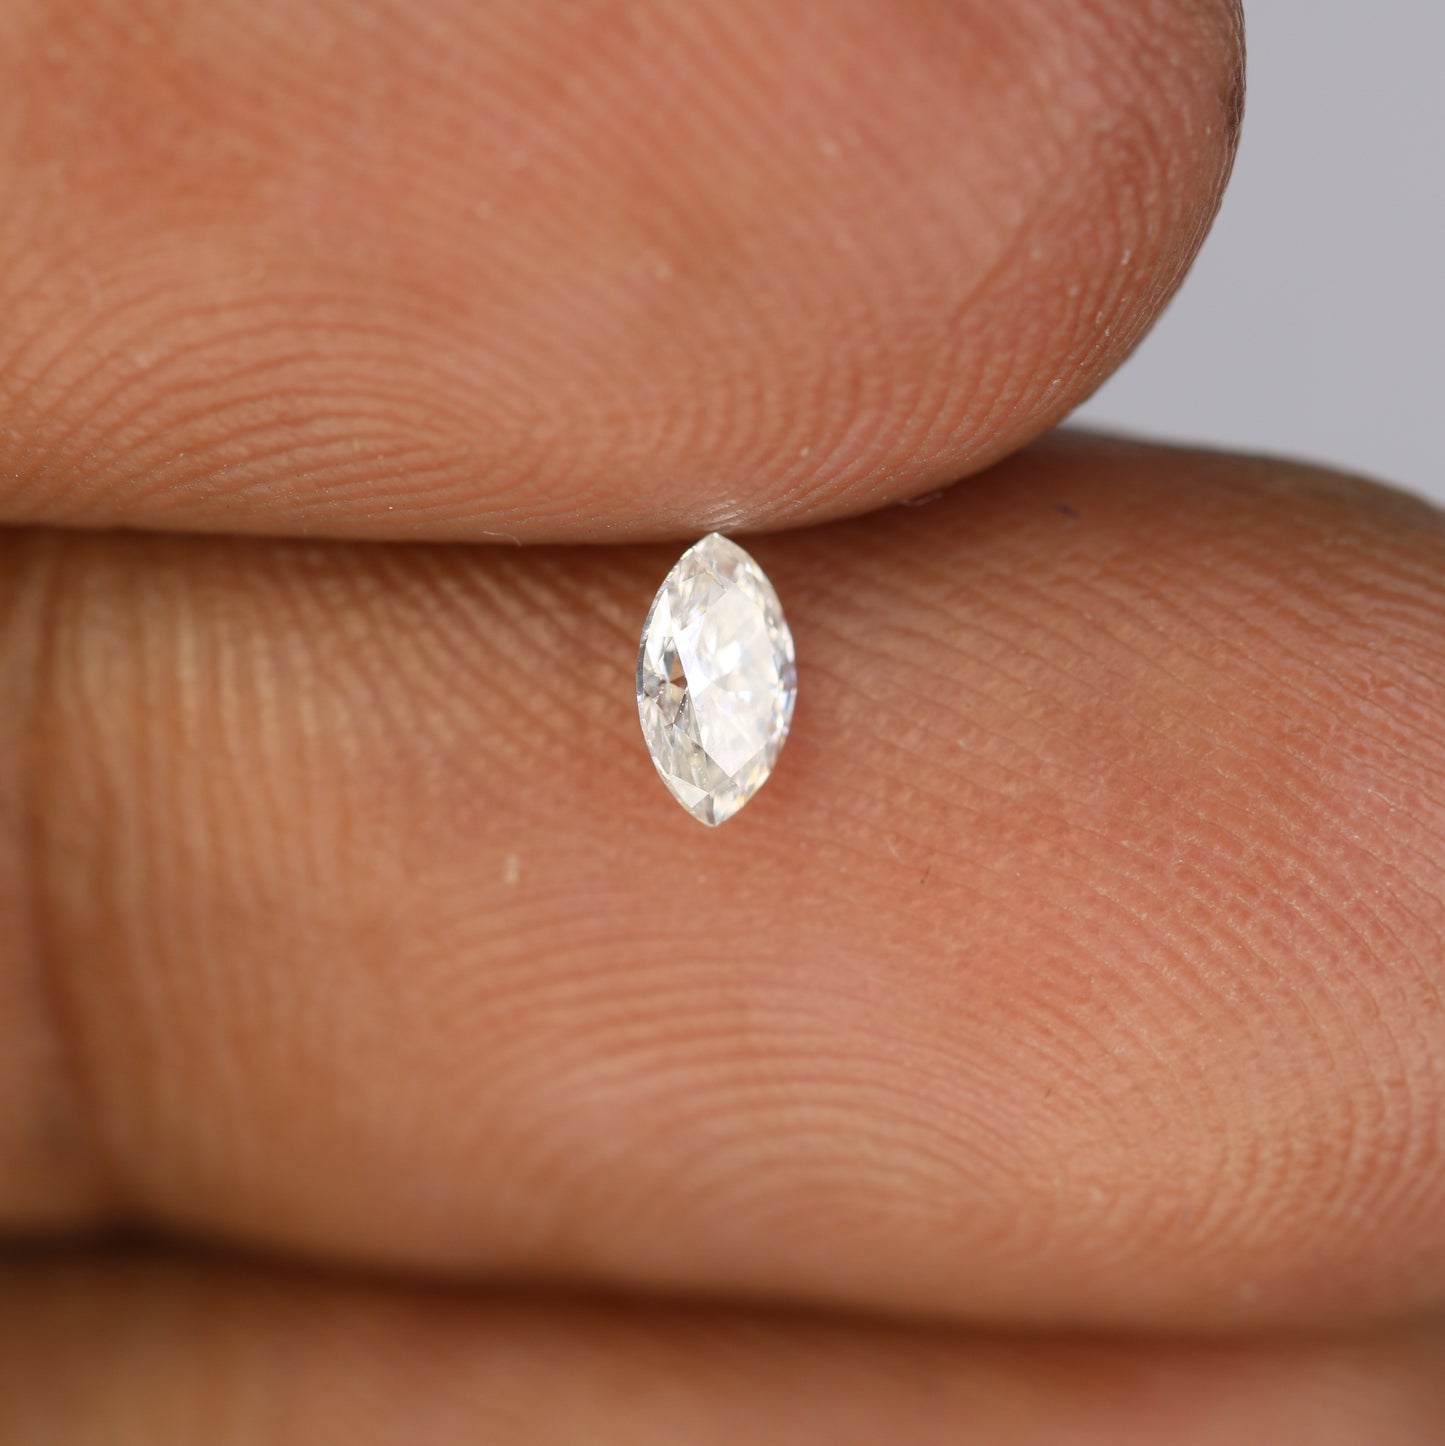 0.20 CT Salt And Pepper Marquise Shape Natural Diamond For Engagement Ring